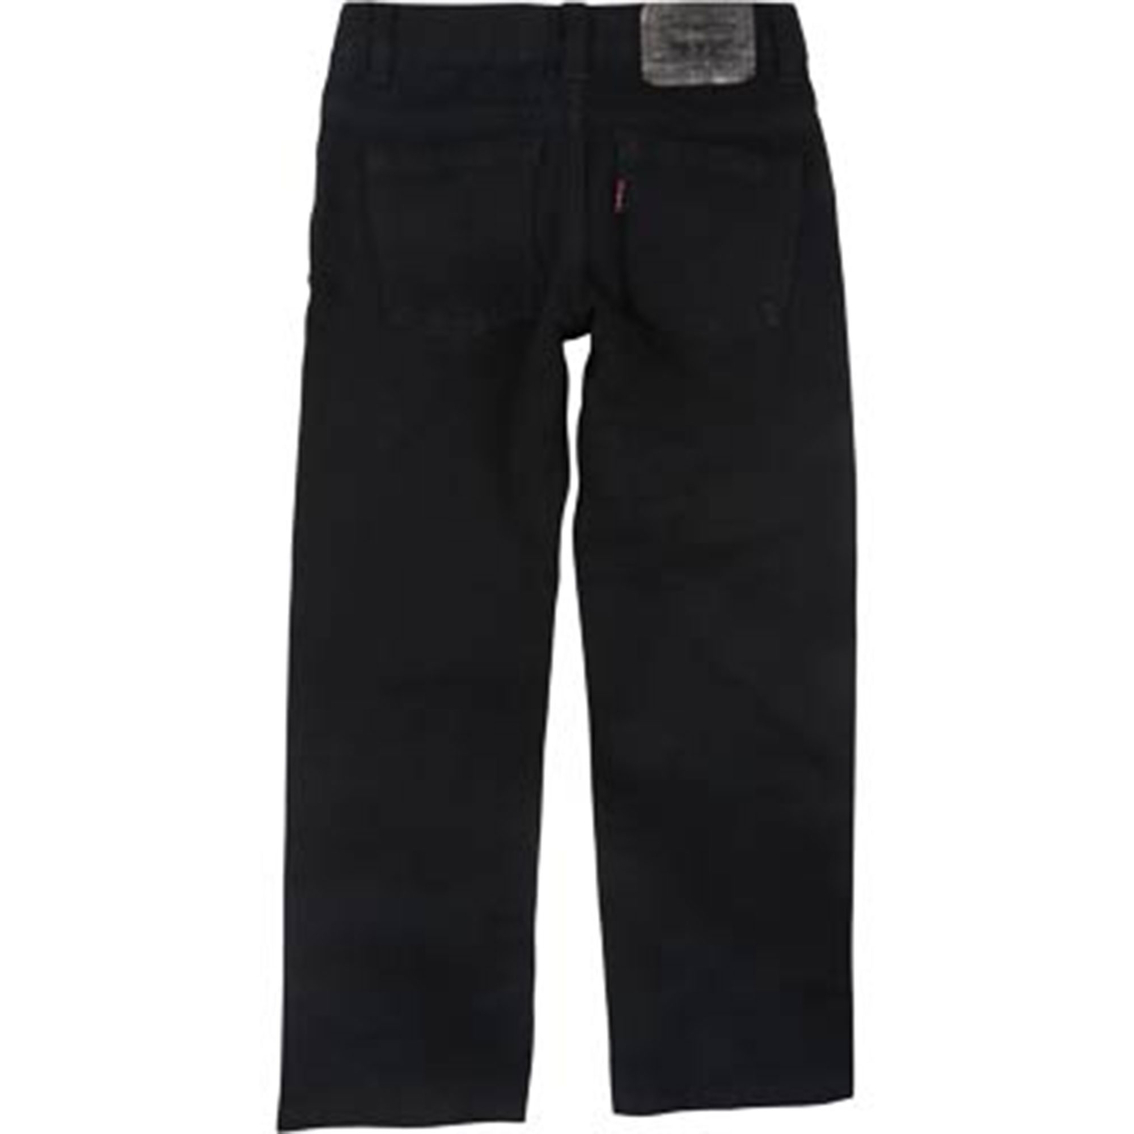 Levi's Boys 511 Skinny Jeans | Boys 8-20 | Clothing & Accessories ...